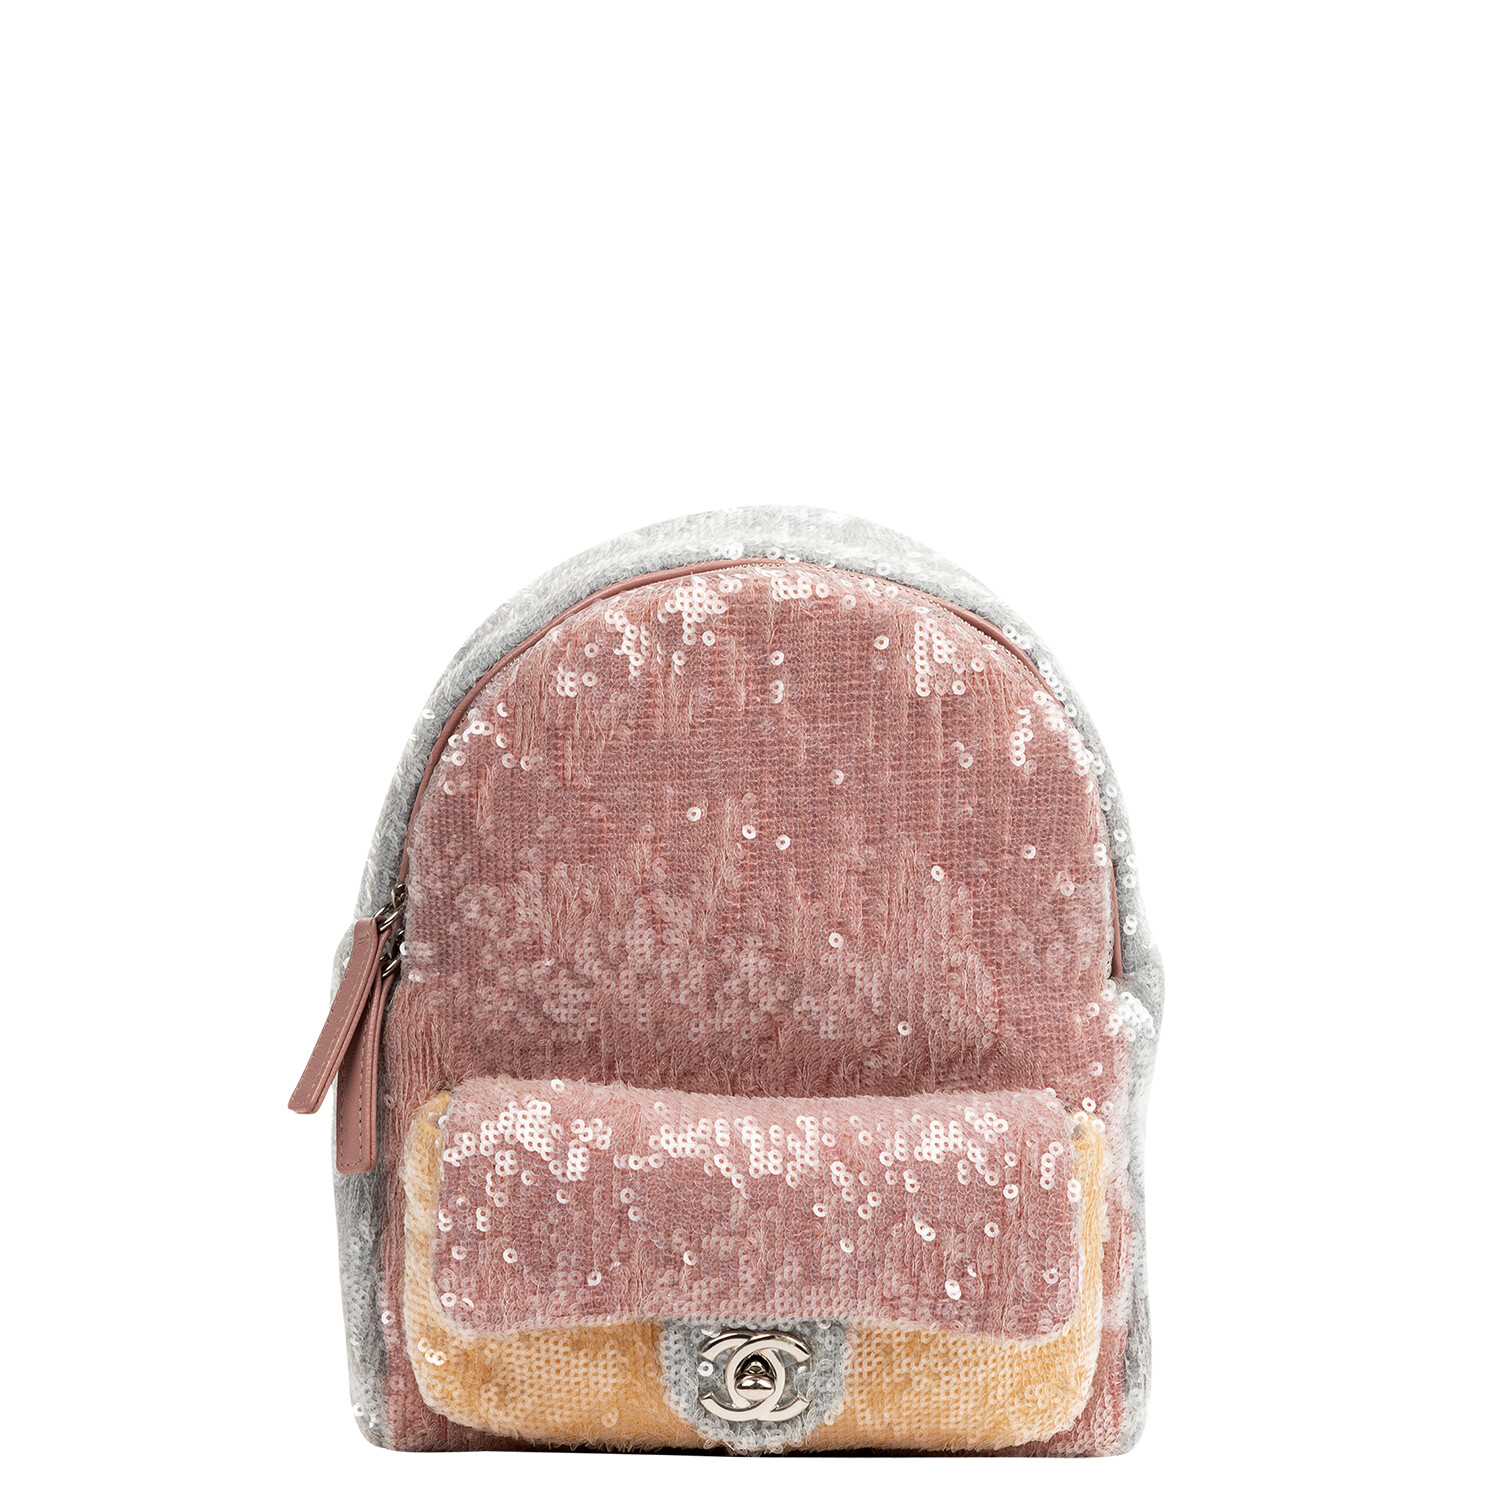 Chanel Sequin Mini Backpack